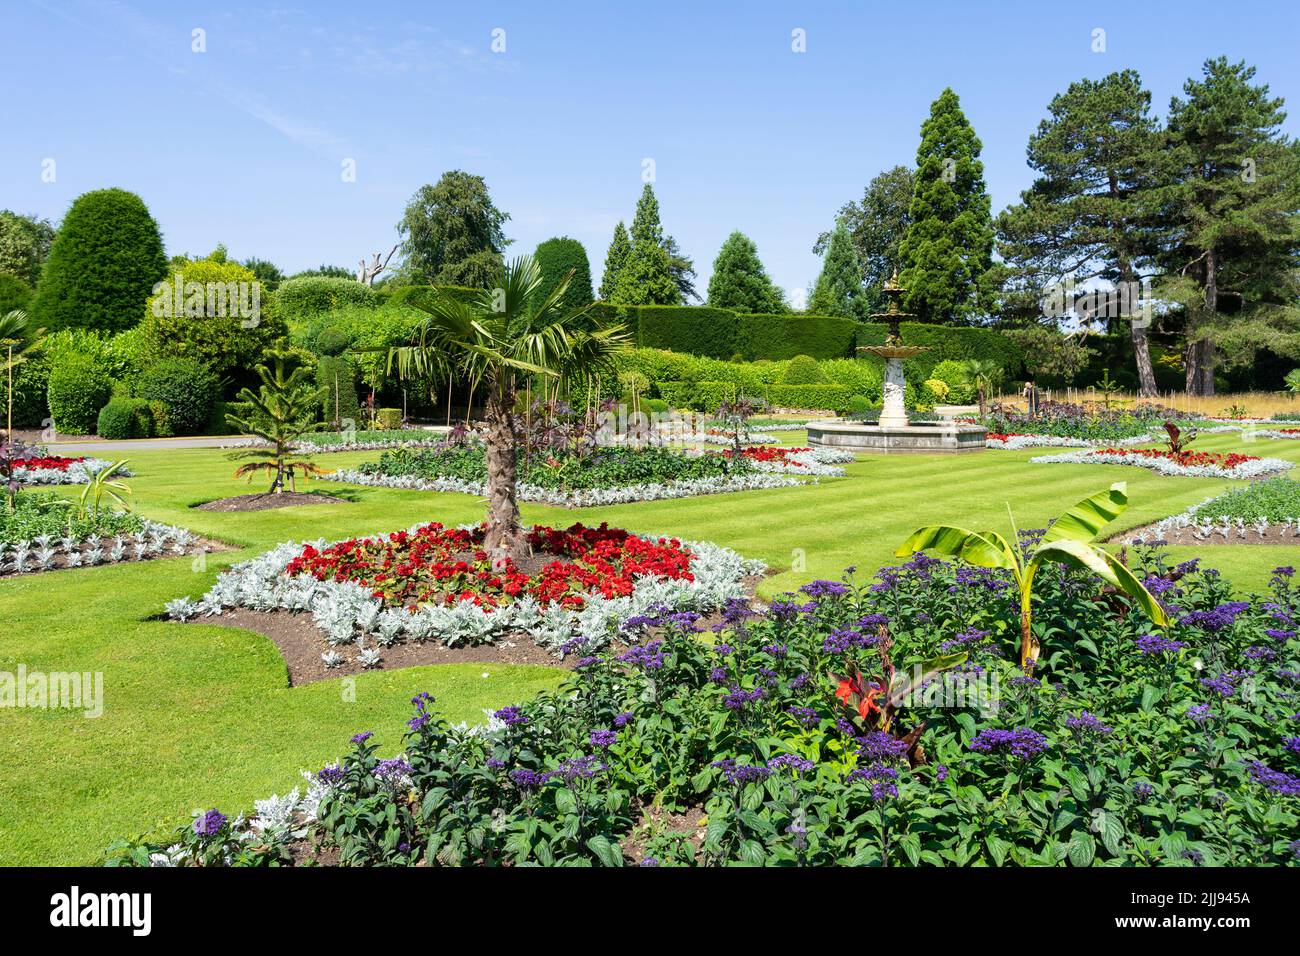 Brodsworth Hall and Topiary display at Brodsworth hall near Doncaster South Yorkshire England UK GB Europe Stock Photo